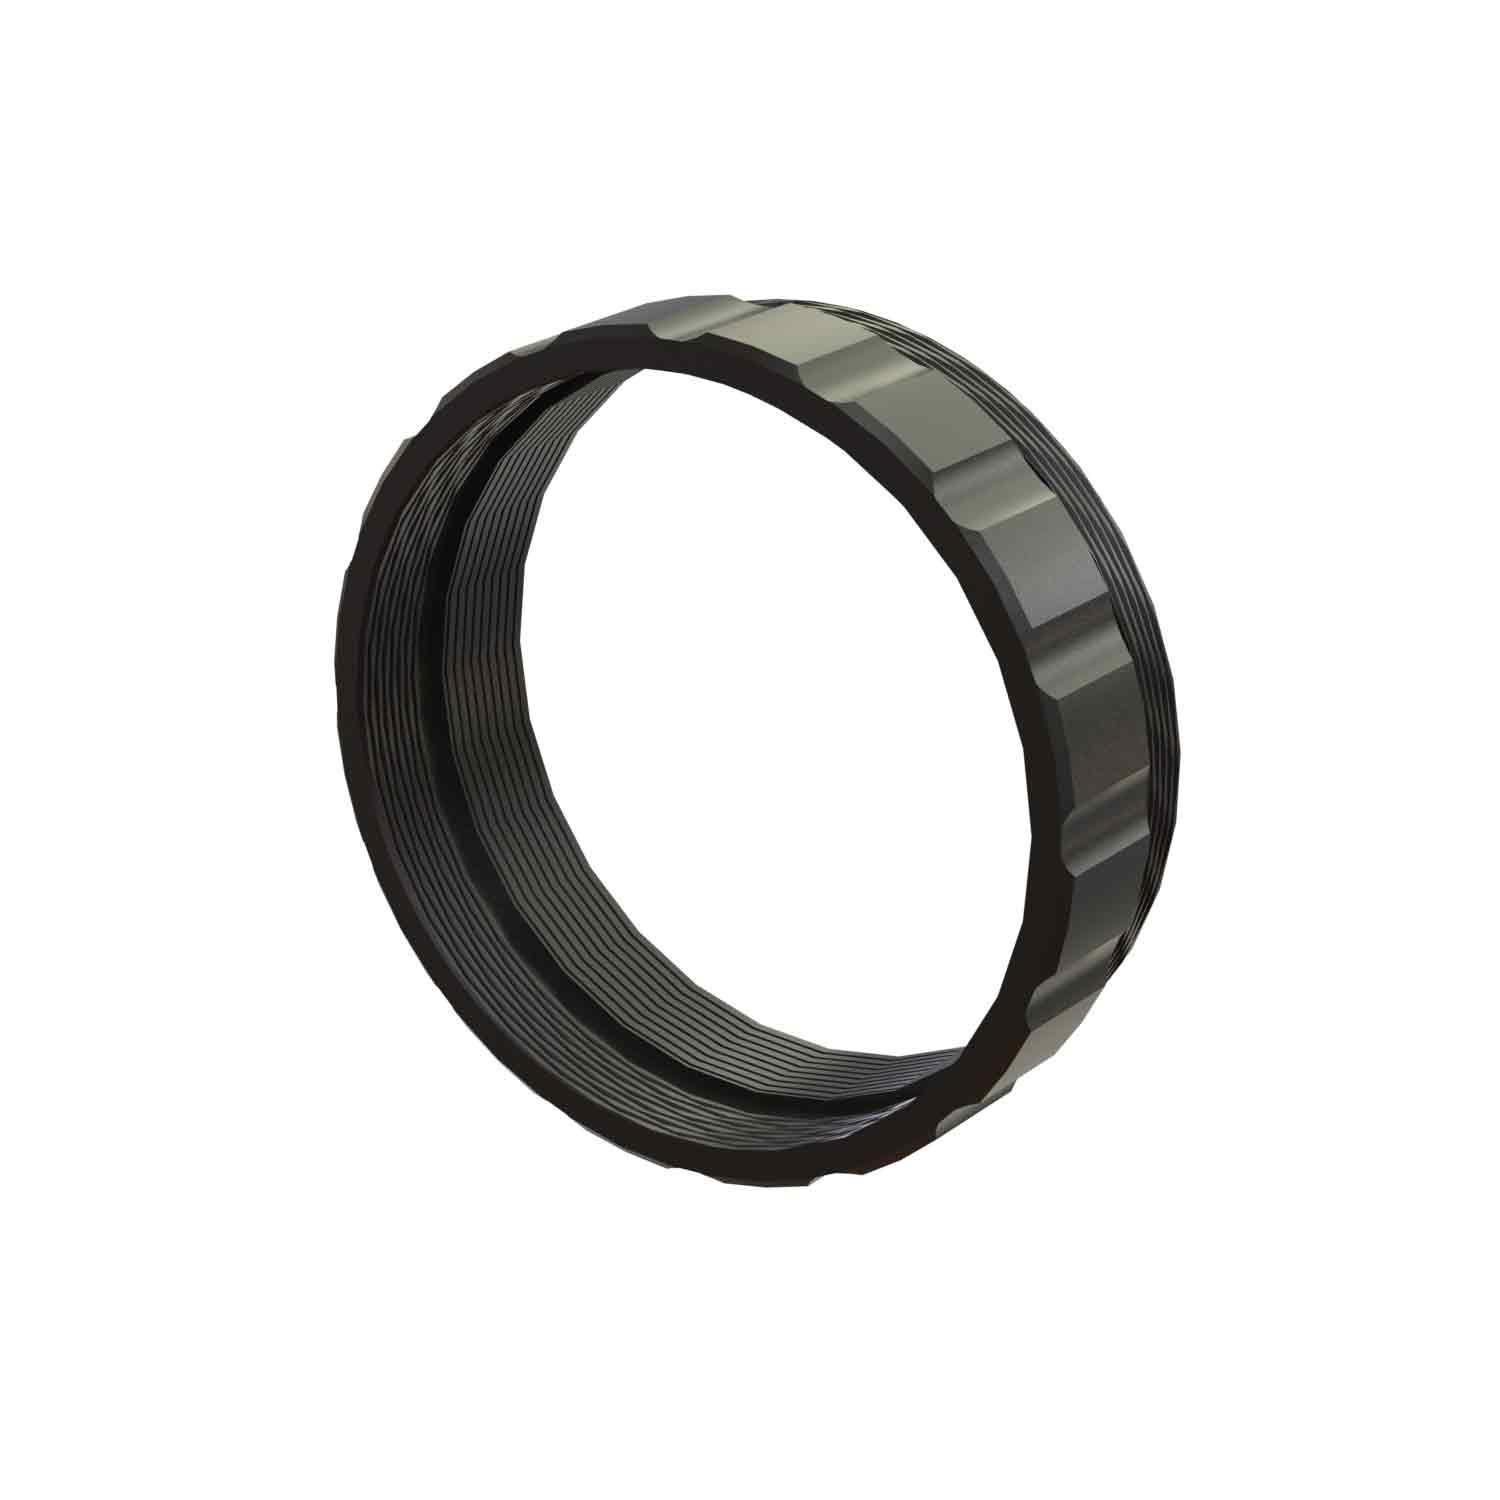 Shrewd Optum 40/35mm to Nomad Lens Adapter